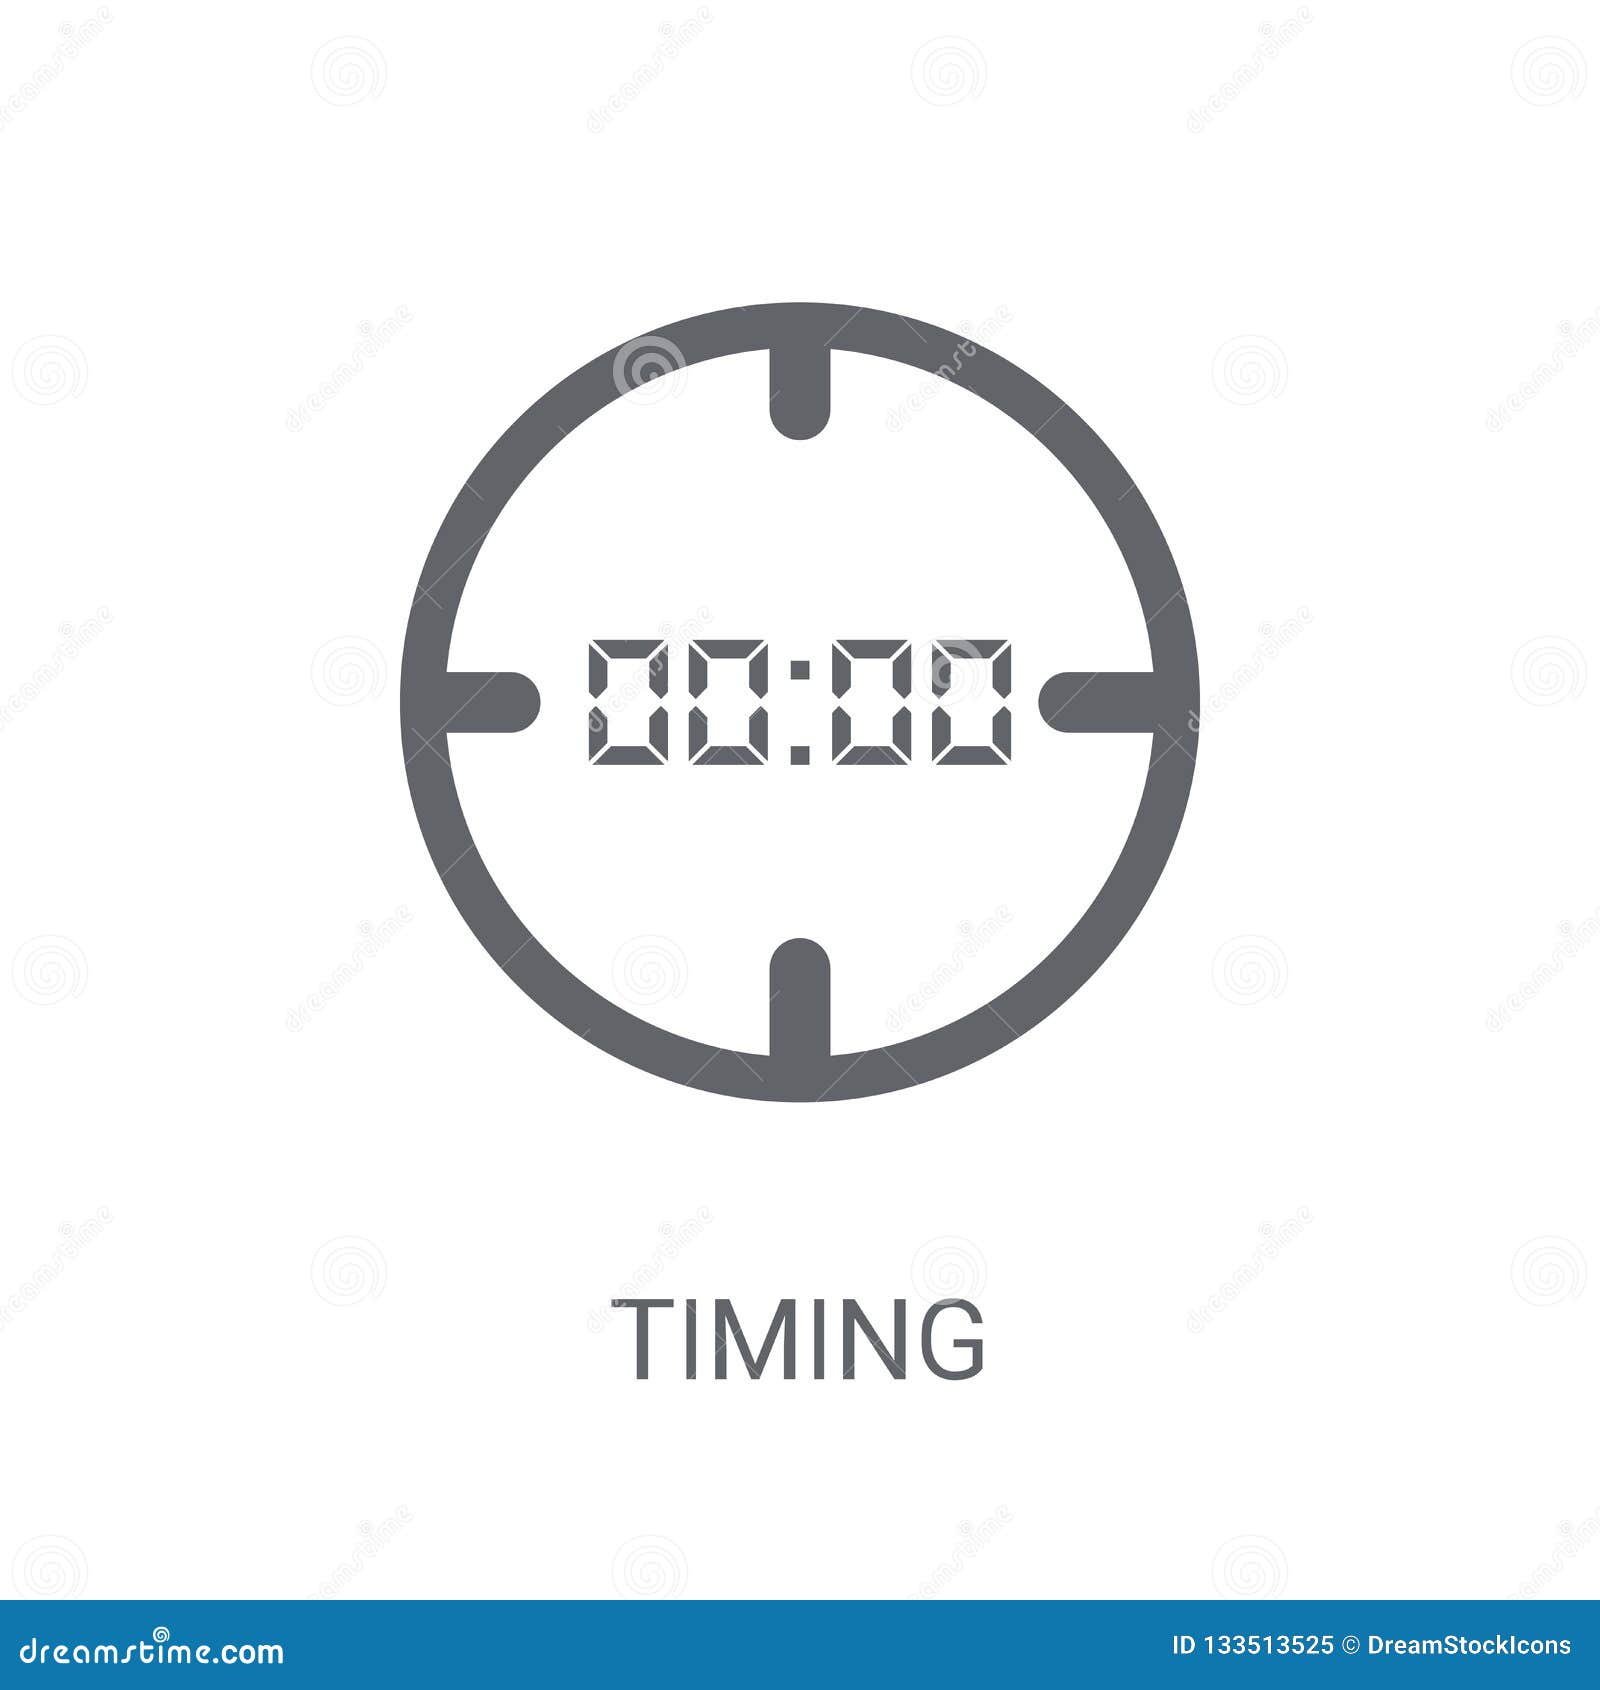 timing icon. trendy timing logo concept on white background from